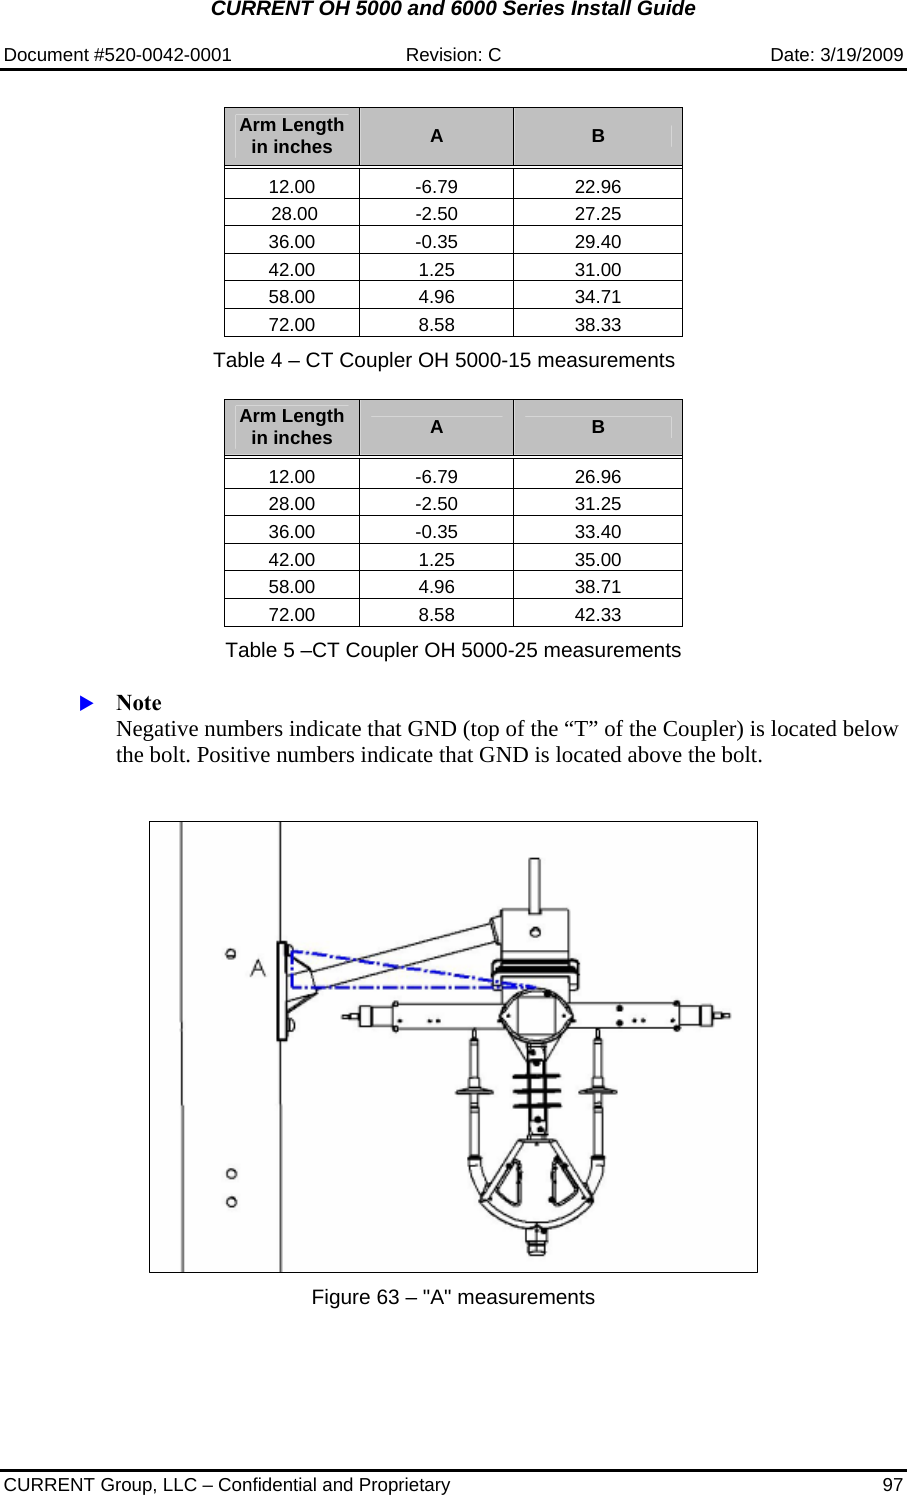 CURRENT OH 5000 and 6000 Series Install Guide  Document #520-0042-0001  Revision: C  Date: 3/19/2009  CURRENT Group, LLC – Confidential and Proprietary  97  Arm Length in inches  A  B 12.00 -6.79  22.96  28.00  -2.50  27.25 36.00 -0.35  29.40 42.00 1.25  31.00 58.00 4.96  34.71 72.00 8.58  38.33  Table 4 – CT Coupler OH 5000-15 measurements  Arm Length in inches  A  B 12.00 -6.79  26.96 28.00 -2.50  31.25 36.00 -0.35  33.40 42.00 1.25  35.00 58.00 4.96  38.71 72.00 8.58  42.33  Table 5 –CT Coupler OH 5000-25 measurements  X Note  Negative numbers indicate that GND (top of the “T” of the Coupler) is located below the bolt. Positive numbers indicate that GND is located above the bolt.     Figure 63 – &quot;A&quot; measurements 